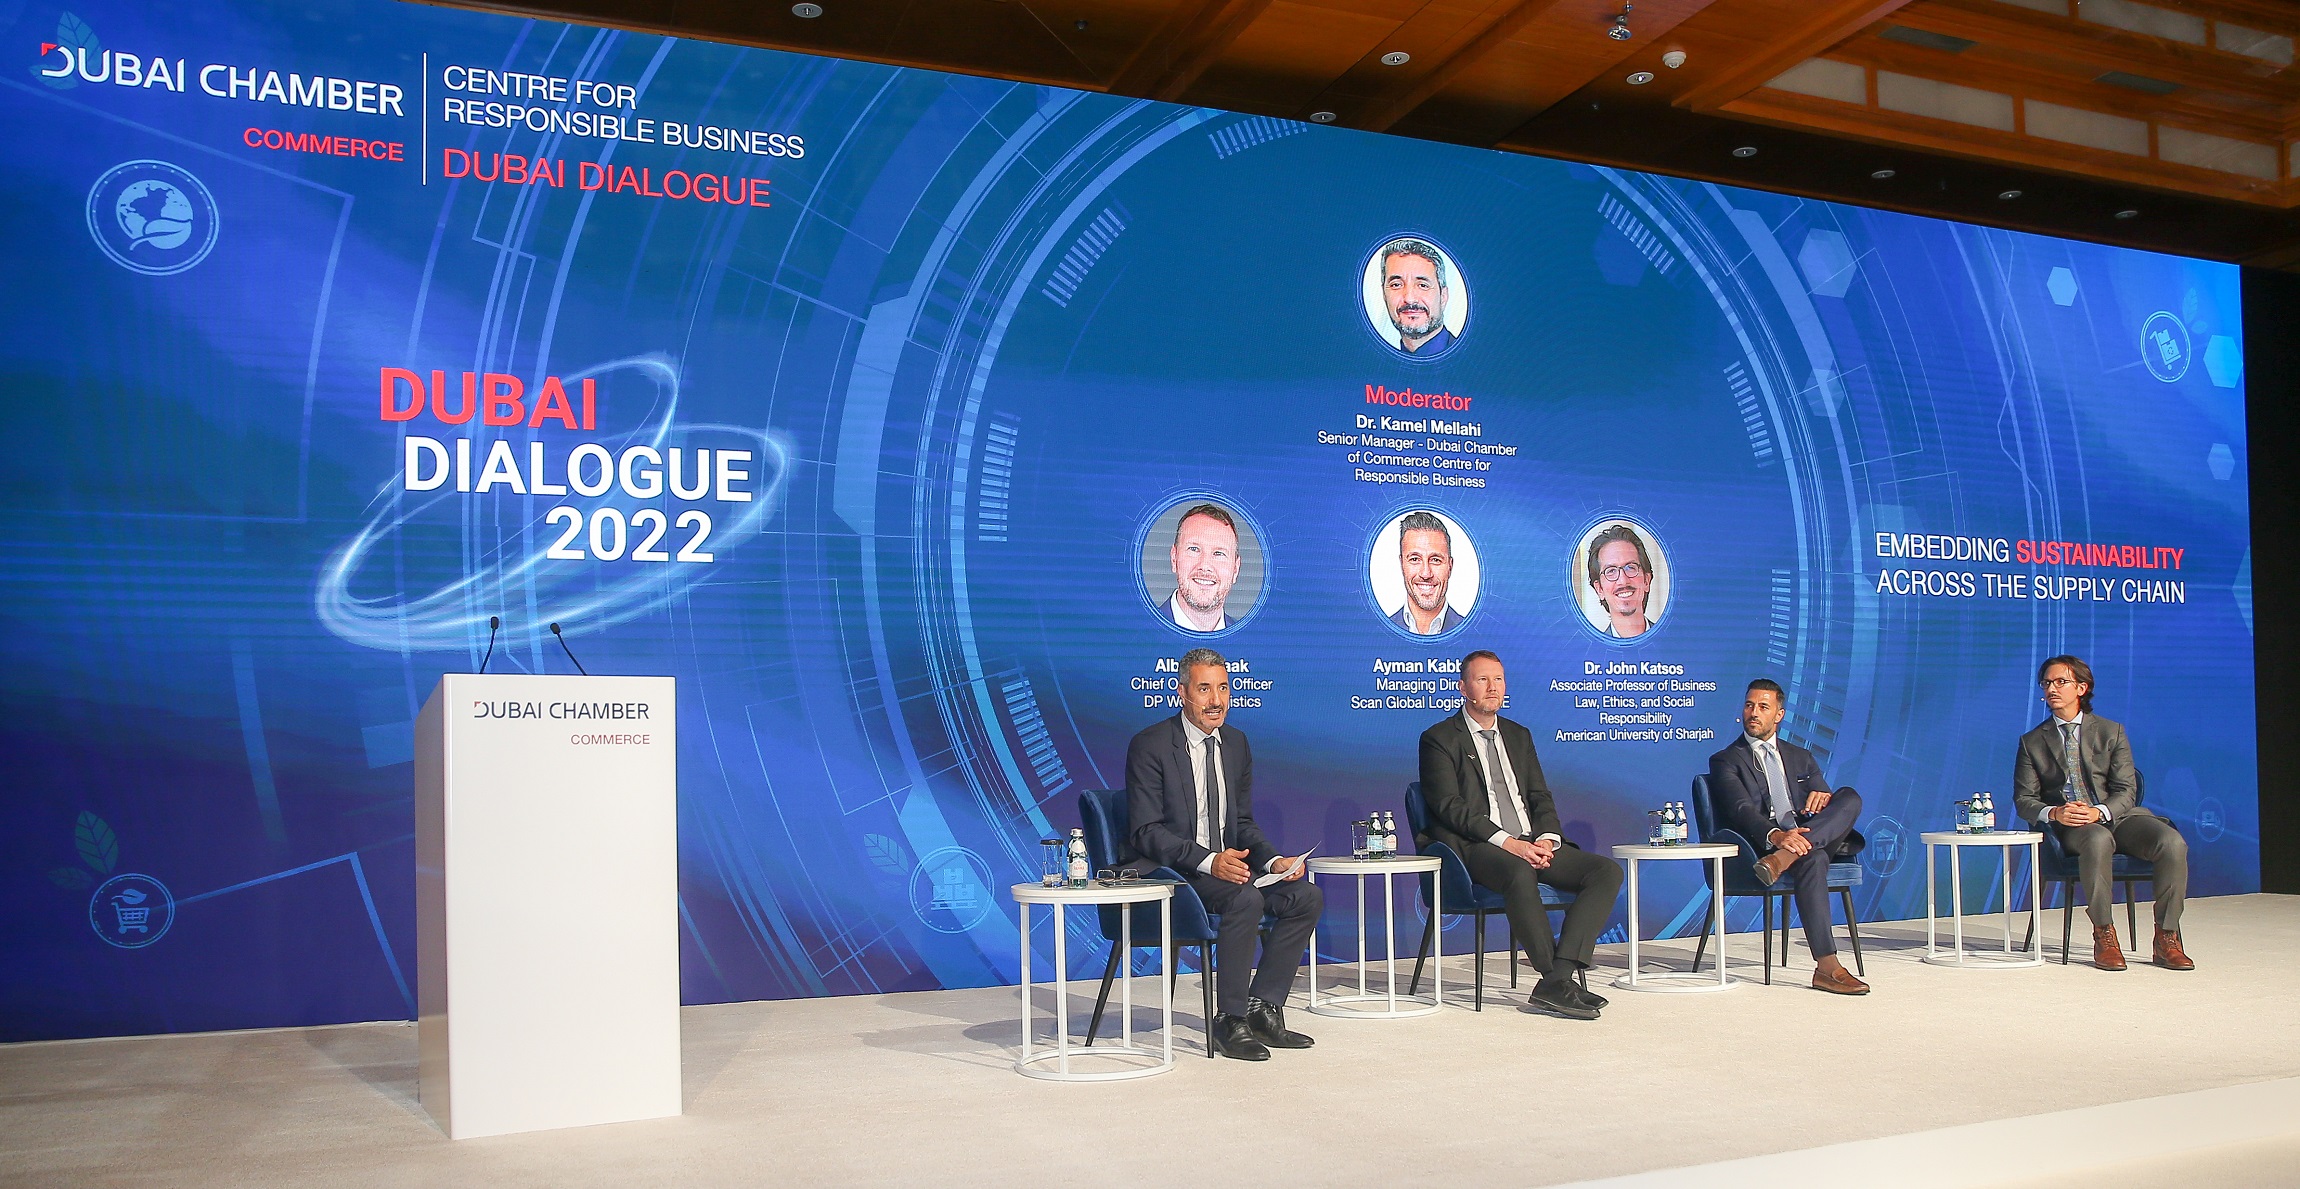 Dubai Dialogue 2022 examines business benefits of embedding sustainability in supply chains